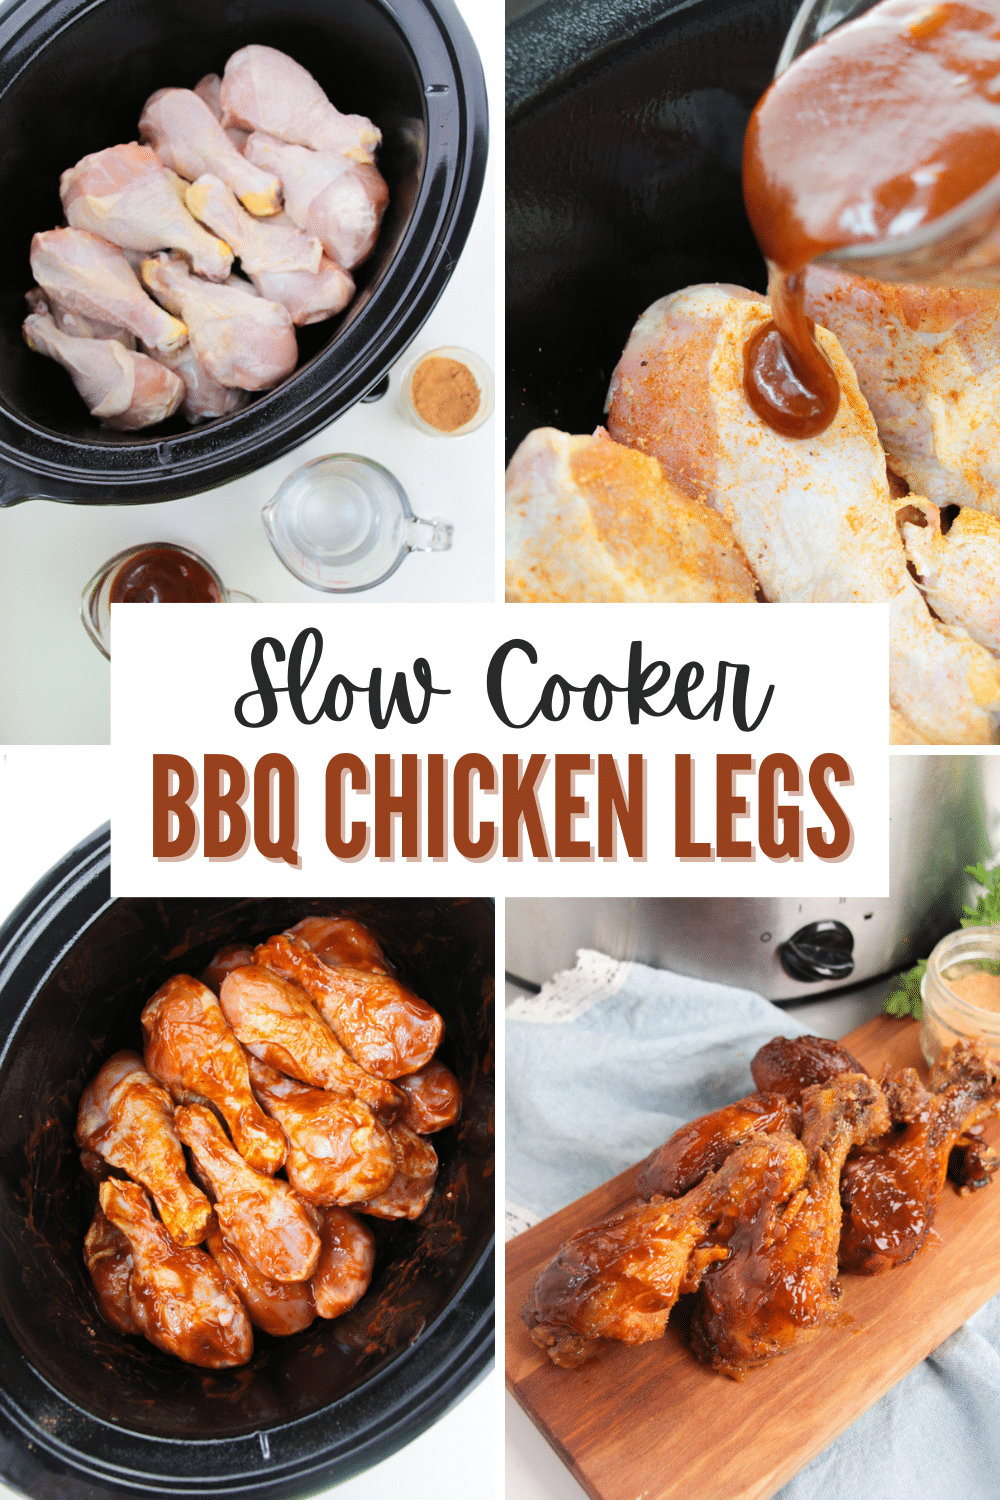 Slow-cooked BBQ chicken legs.